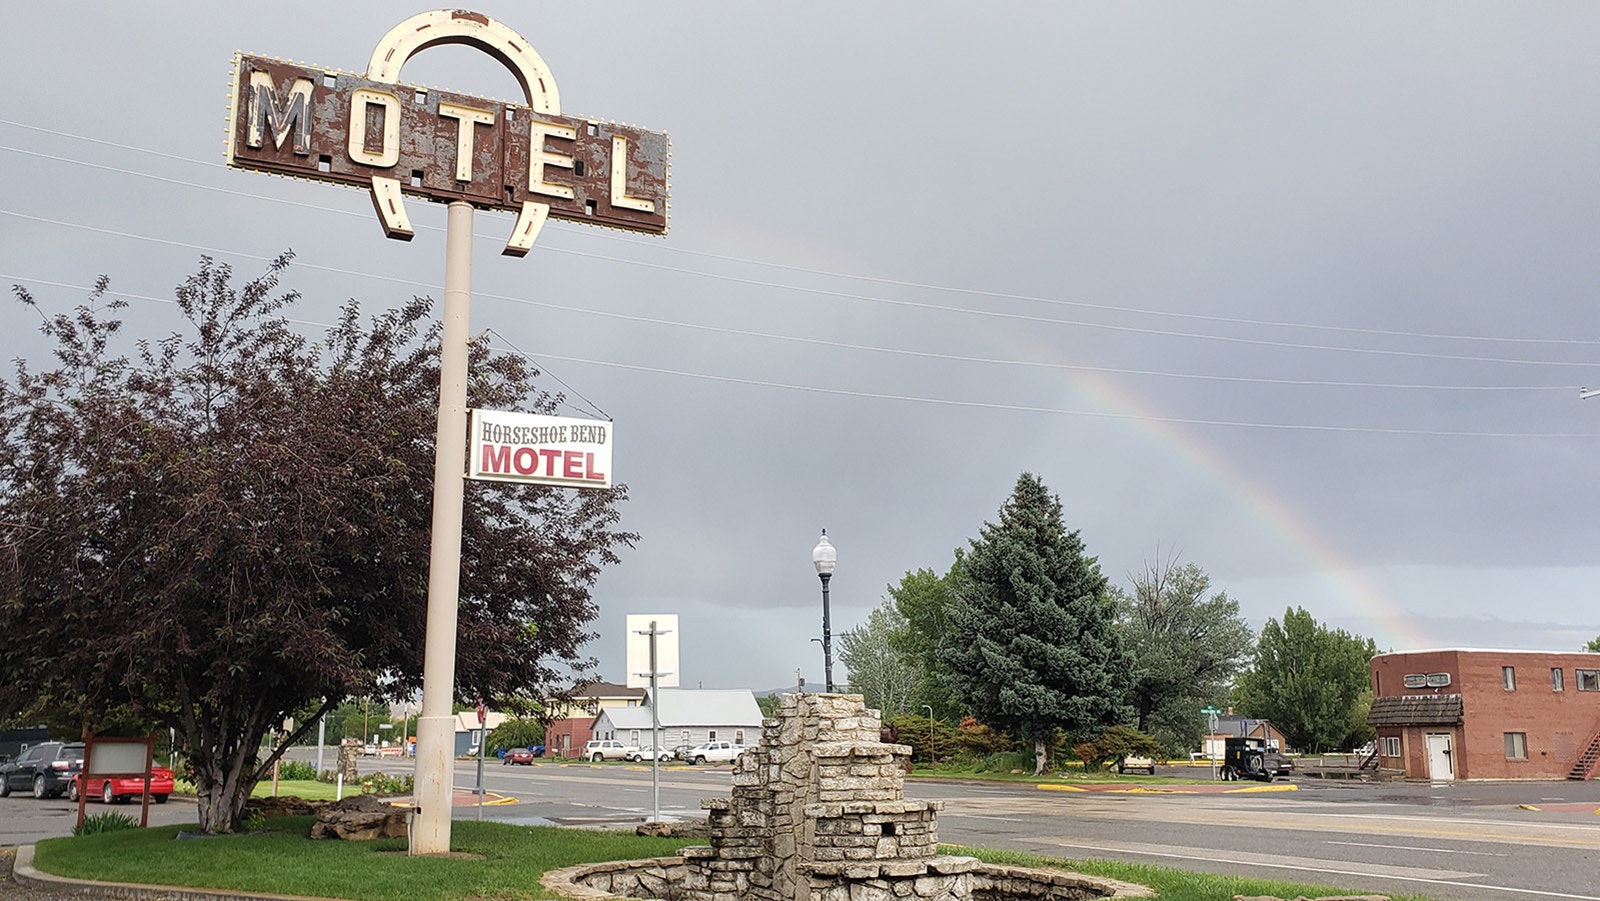 The iconic Horseshoe Bend Motel sign in Lovell, Wyoming, is going to get a facelift.